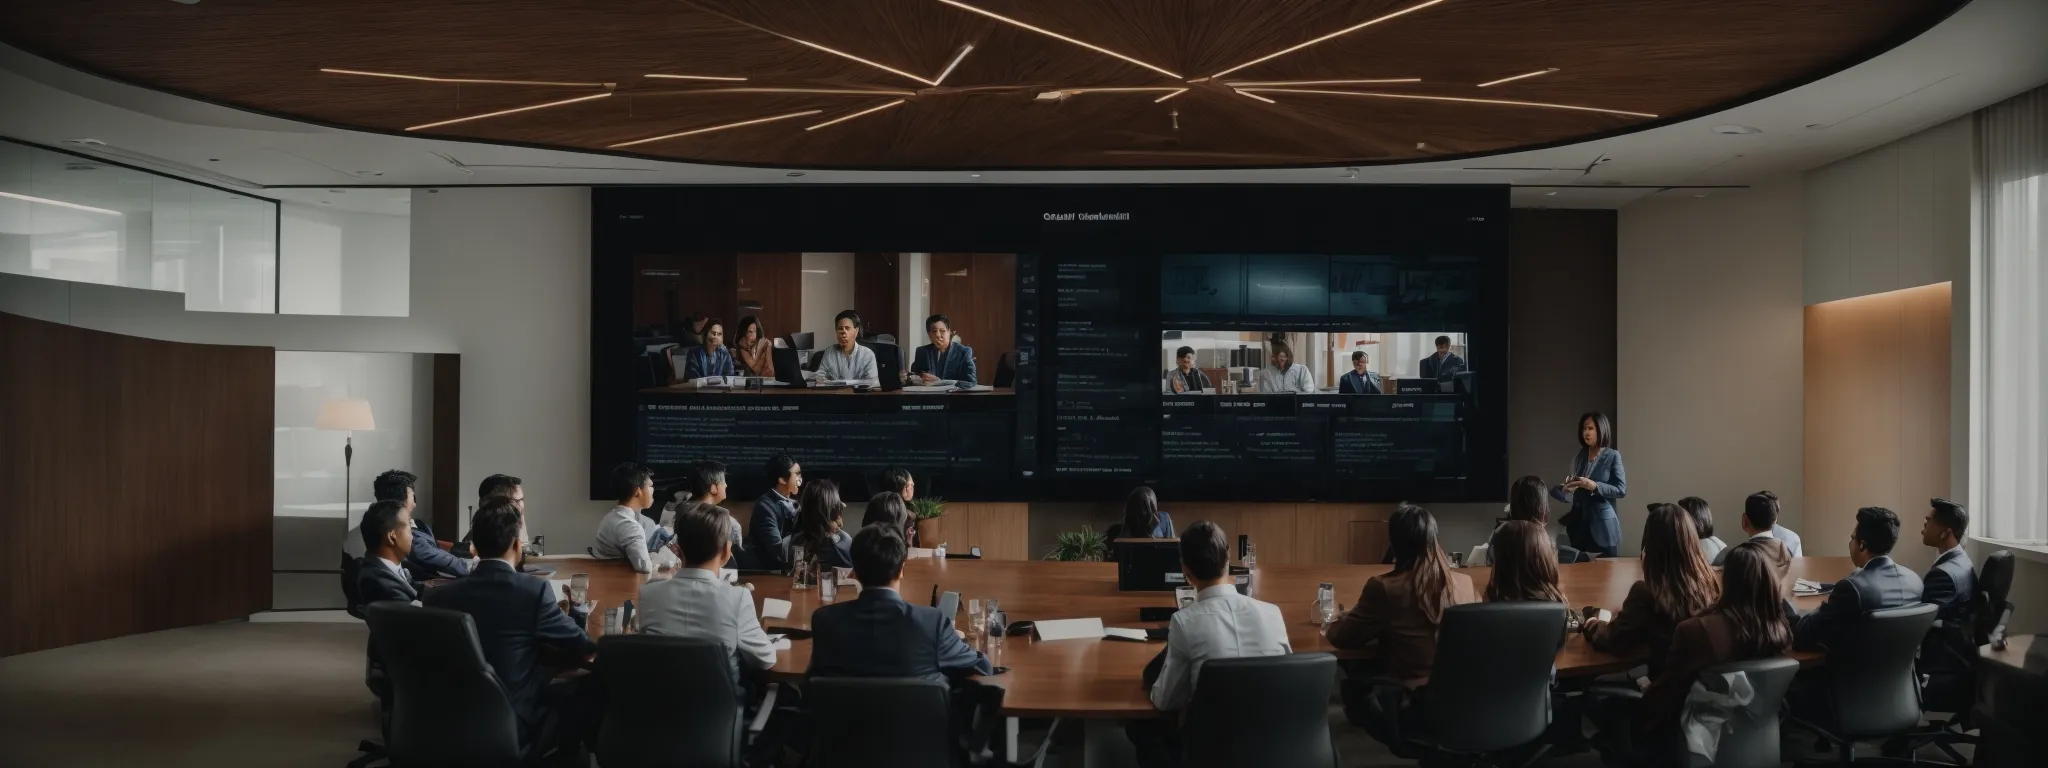 a conference room where a diverse team enthusiastically crafts digital content on a large screen.